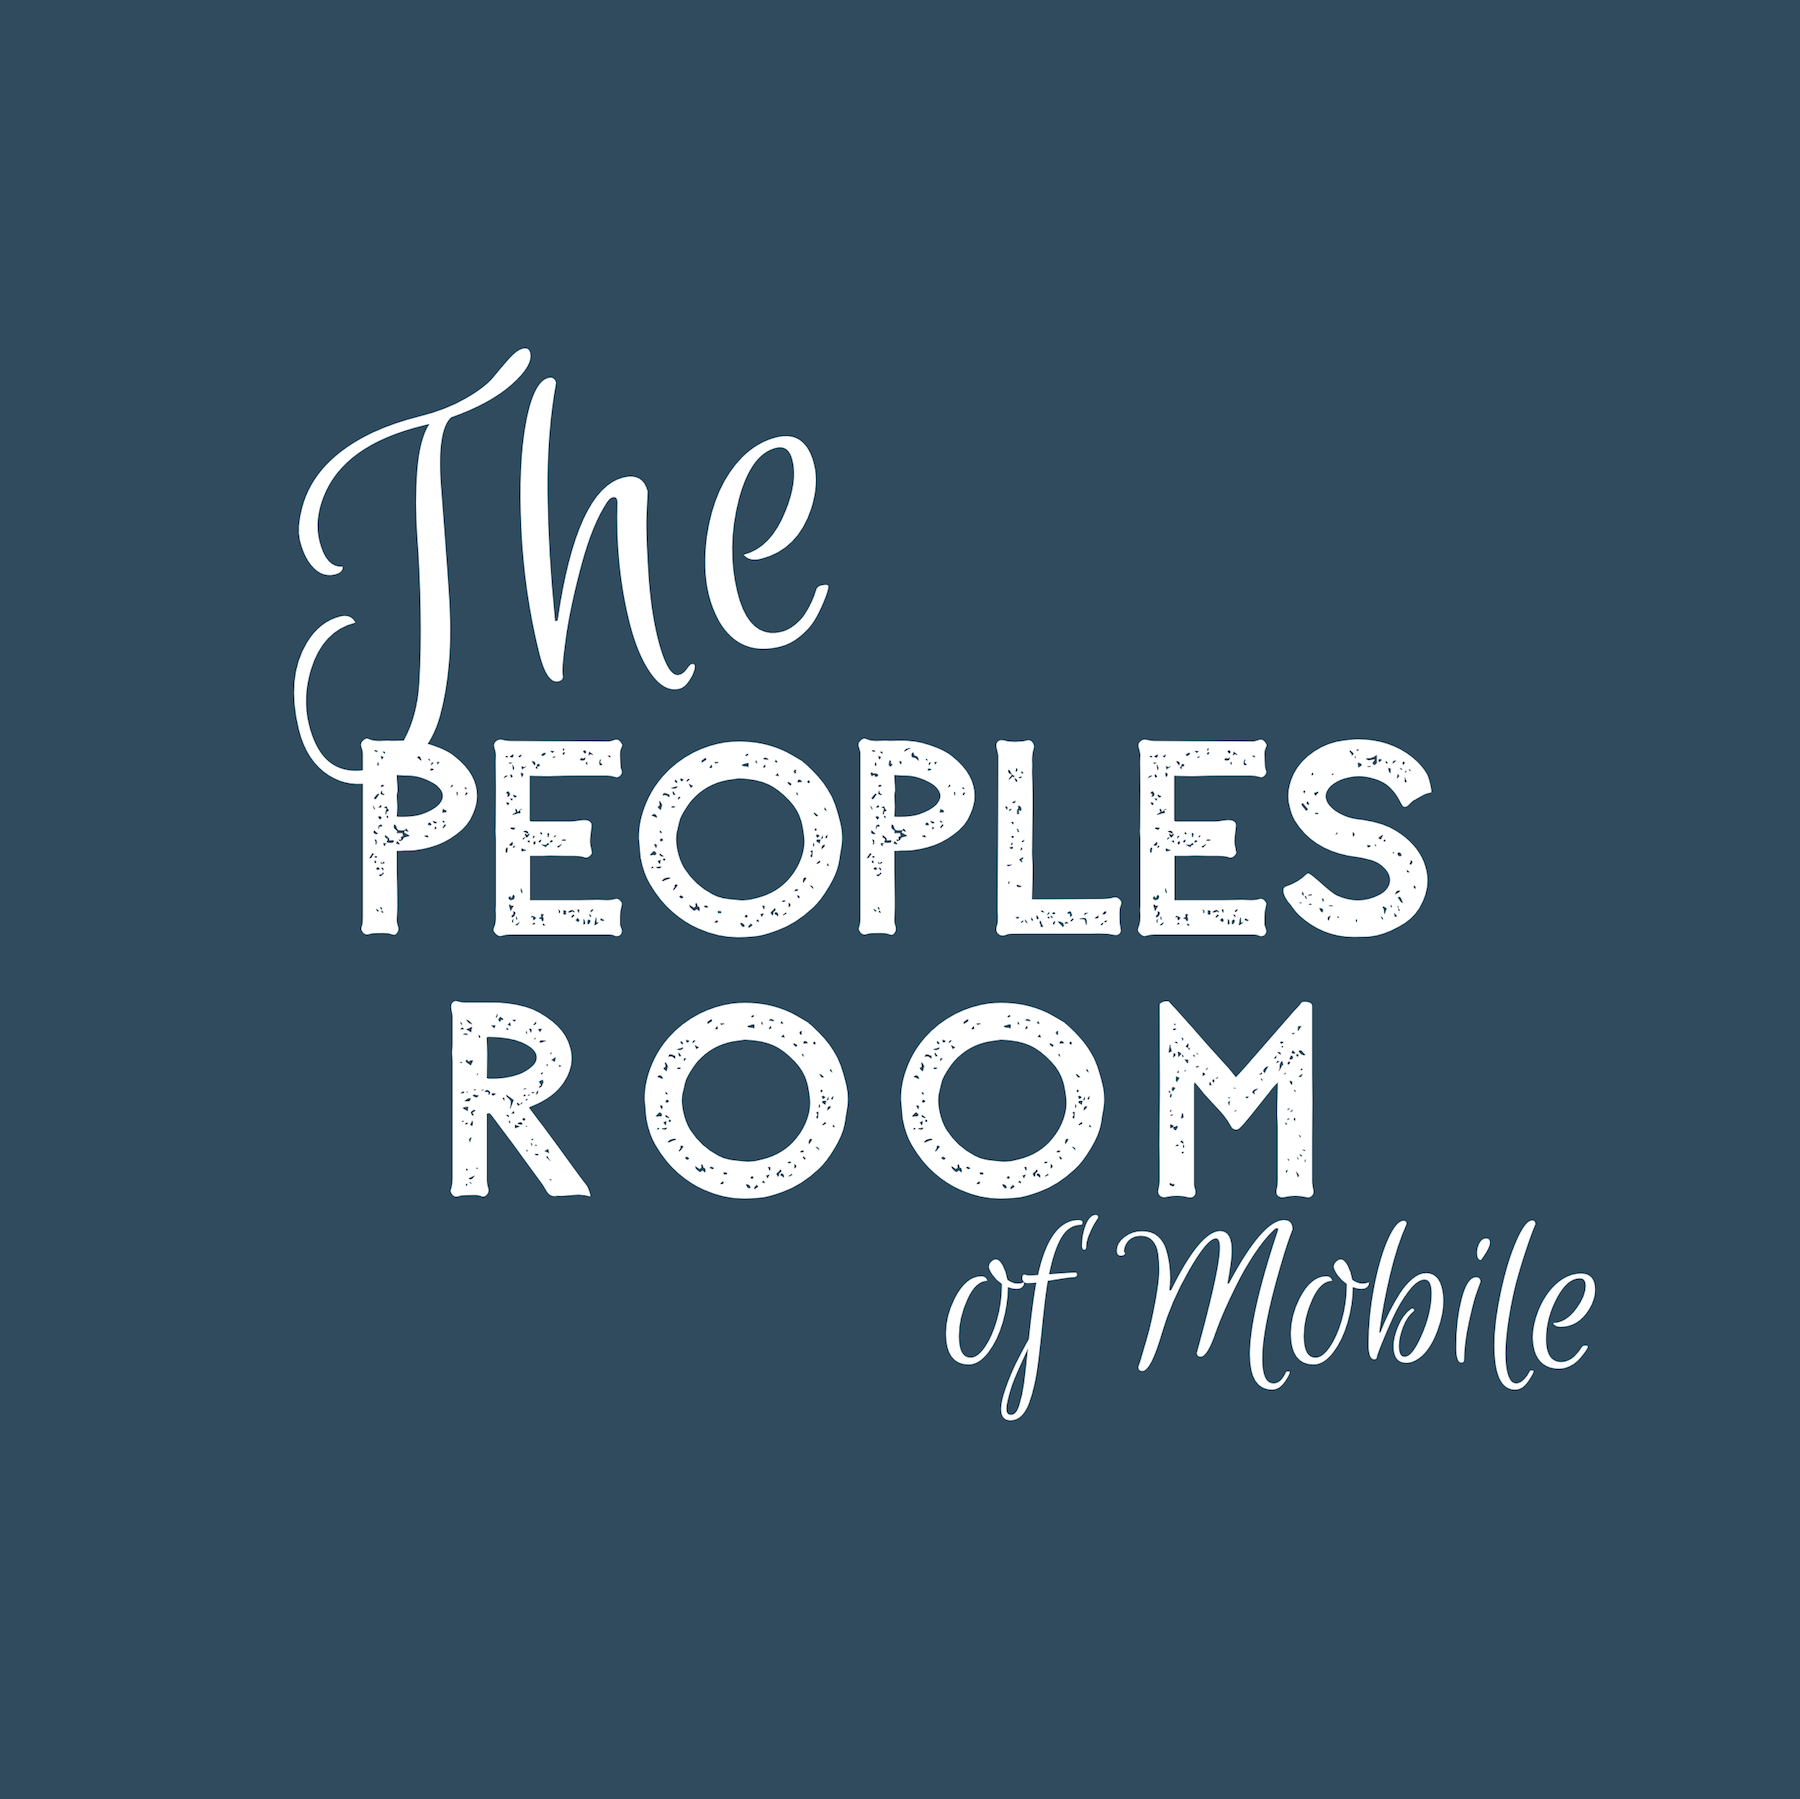 The Peoples Room of Mobile